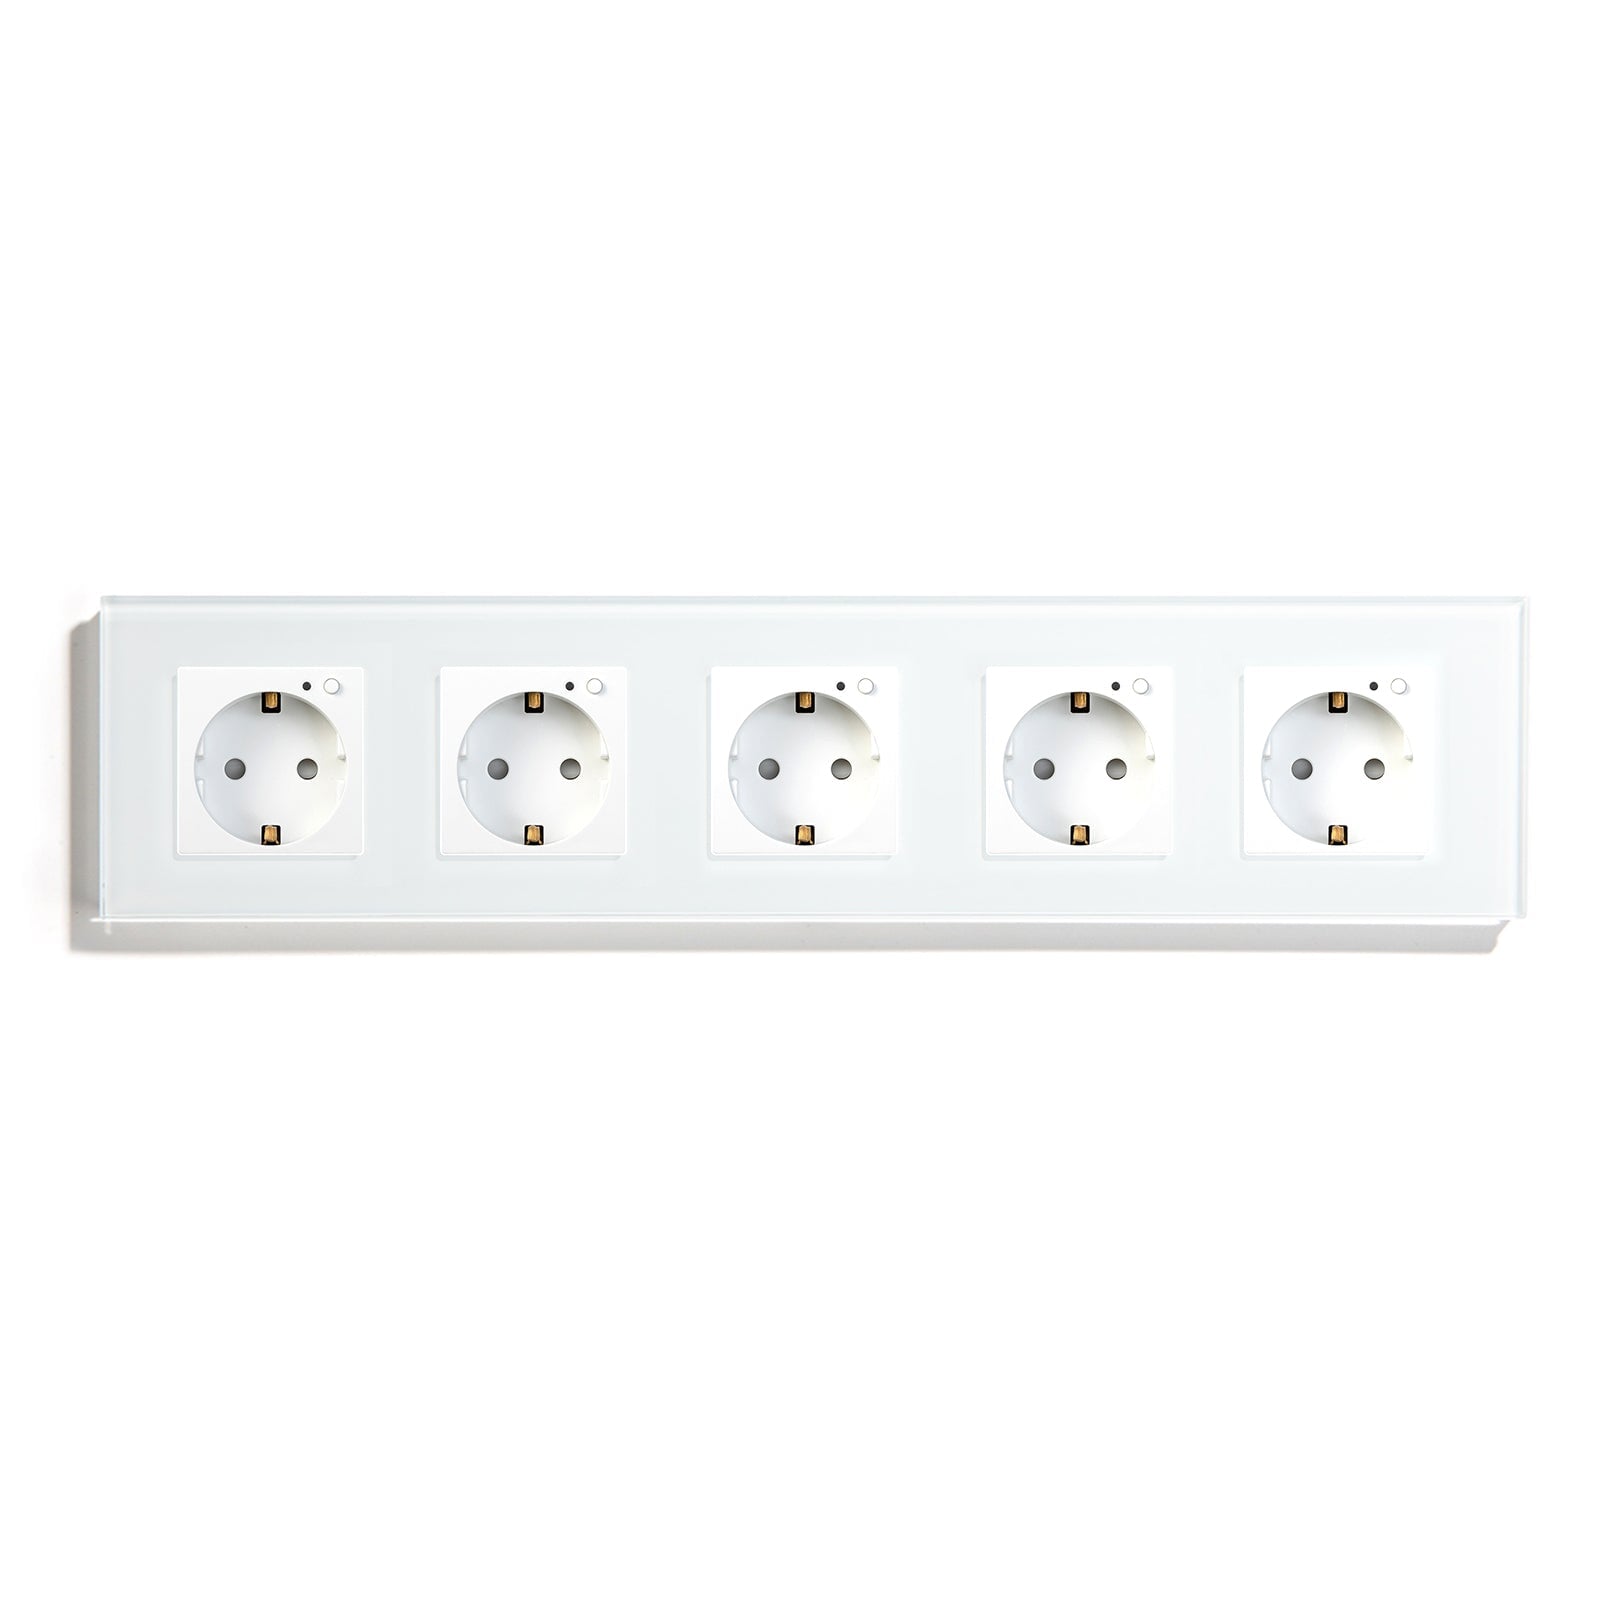 BSEED ZigBee EU Wall Sockets Power Outlets Kids Protection Wall Plates & Covers Bseedswitch white Quintuple 